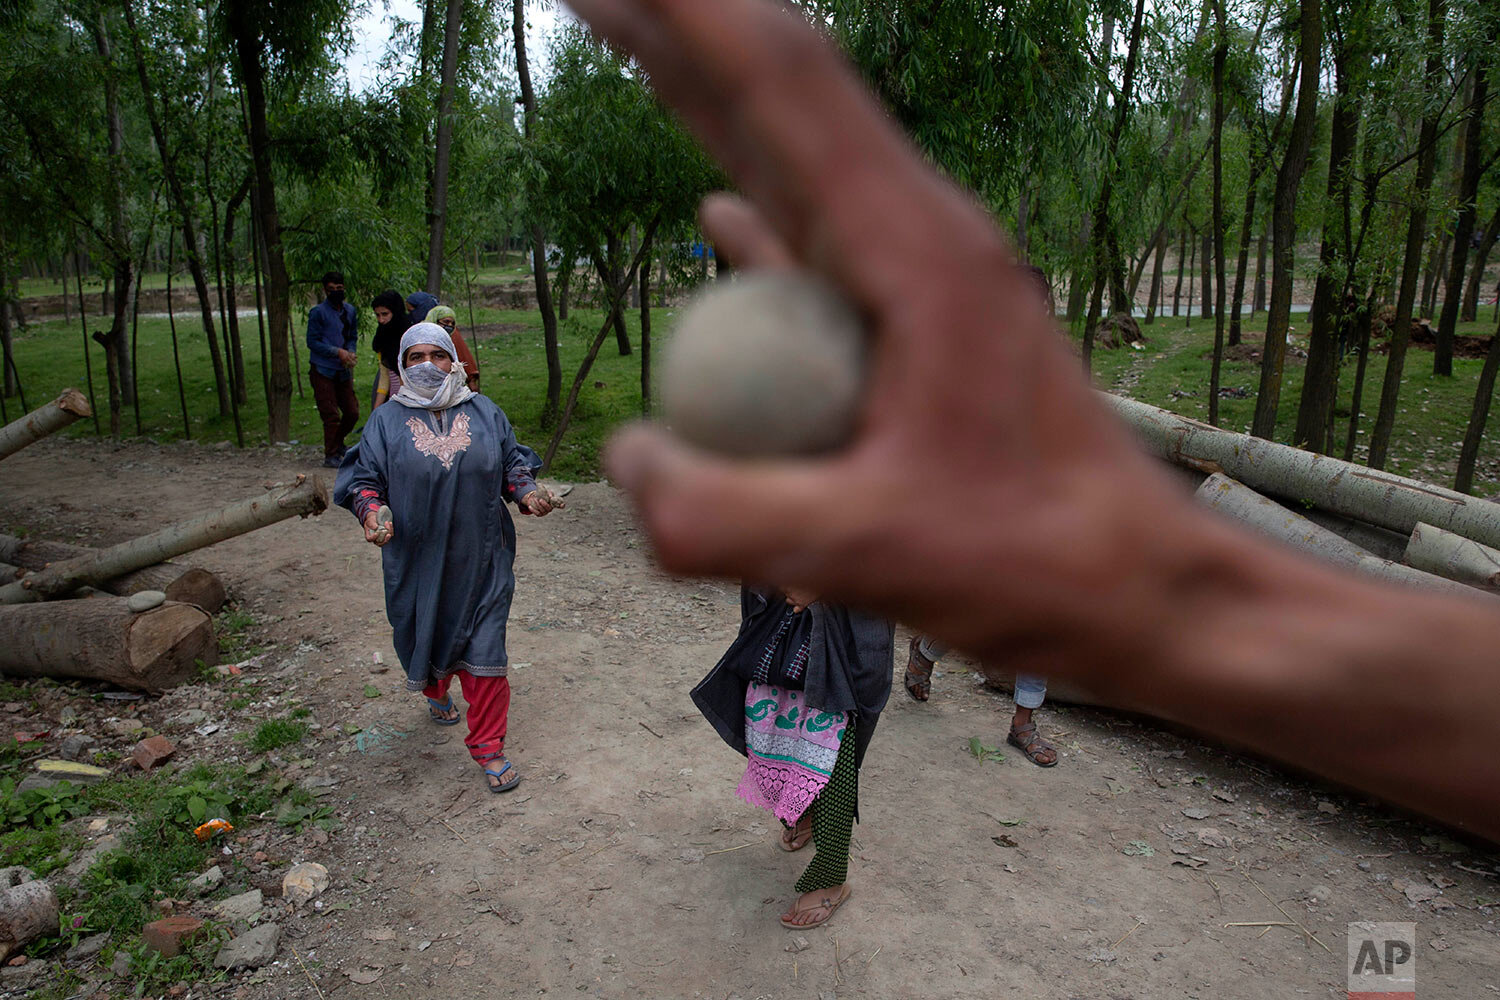  A Kashmiri village woman collects stones to hand to the men to throw at security personnel during a protest against the killing of a civilian in Makhama village, west of Srinagar, Indian controlled Kashmir, Wednesday, May 13, 2020.  (AP Photo/ Dar Y